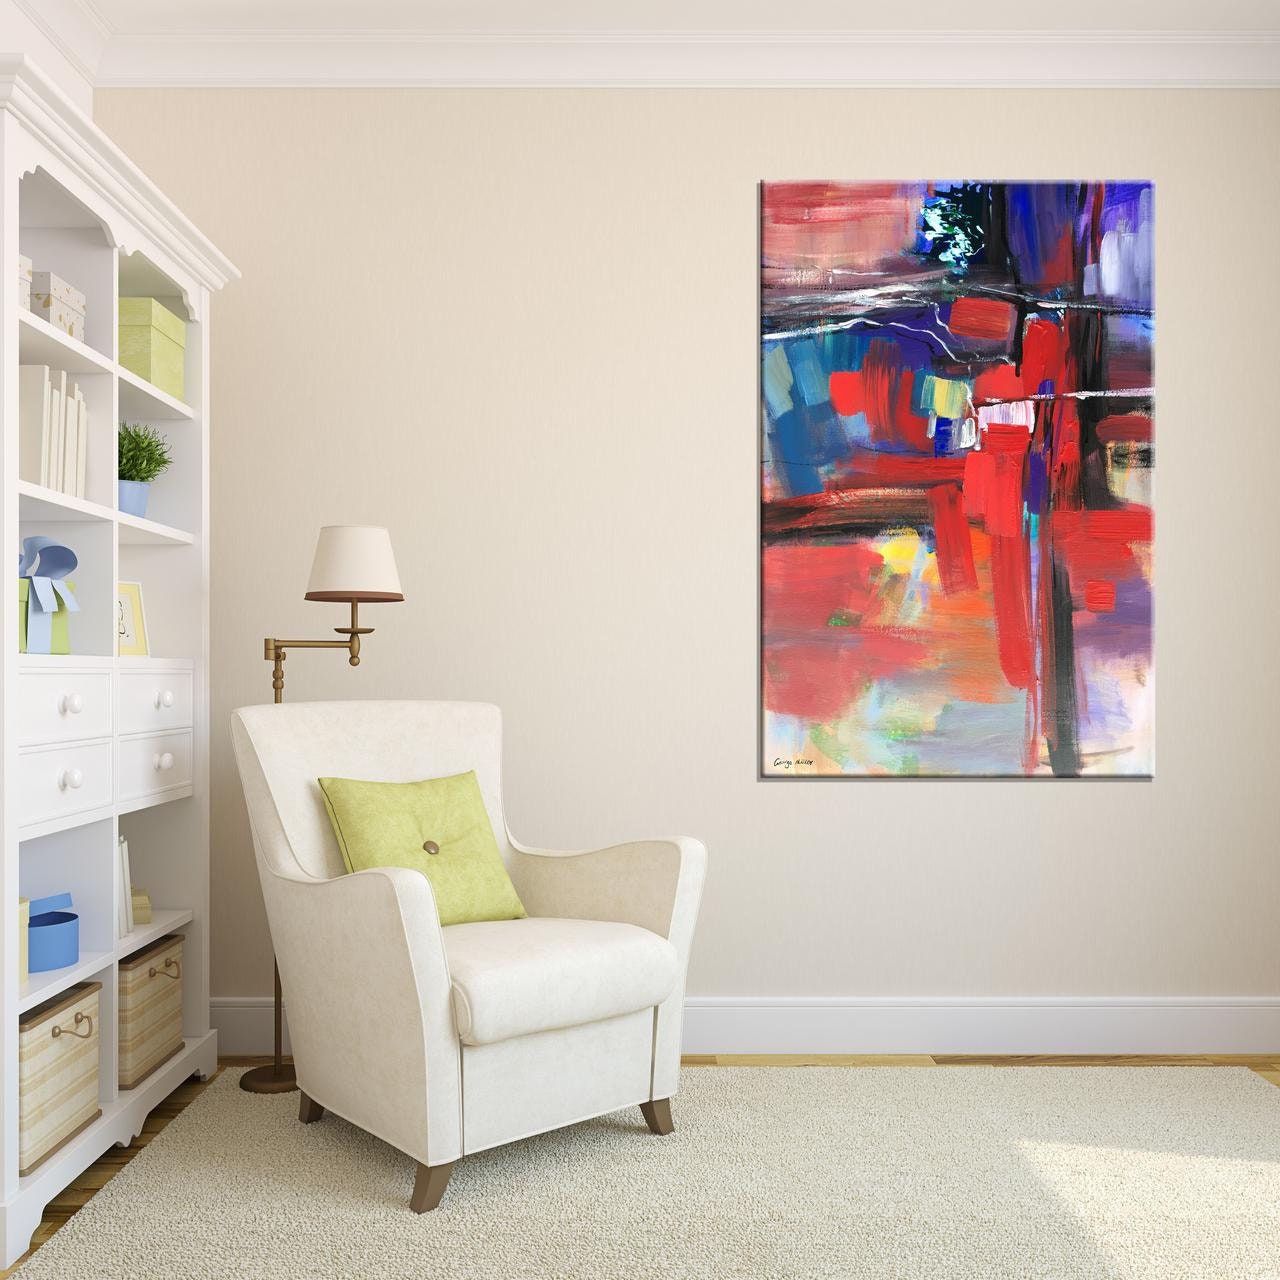 Large Wall Art Painting, Original Painting, Contemporary Art, Abstract Oil Painting, Canvas Art, Large Canvas Painting, Bedroom Wall Decor